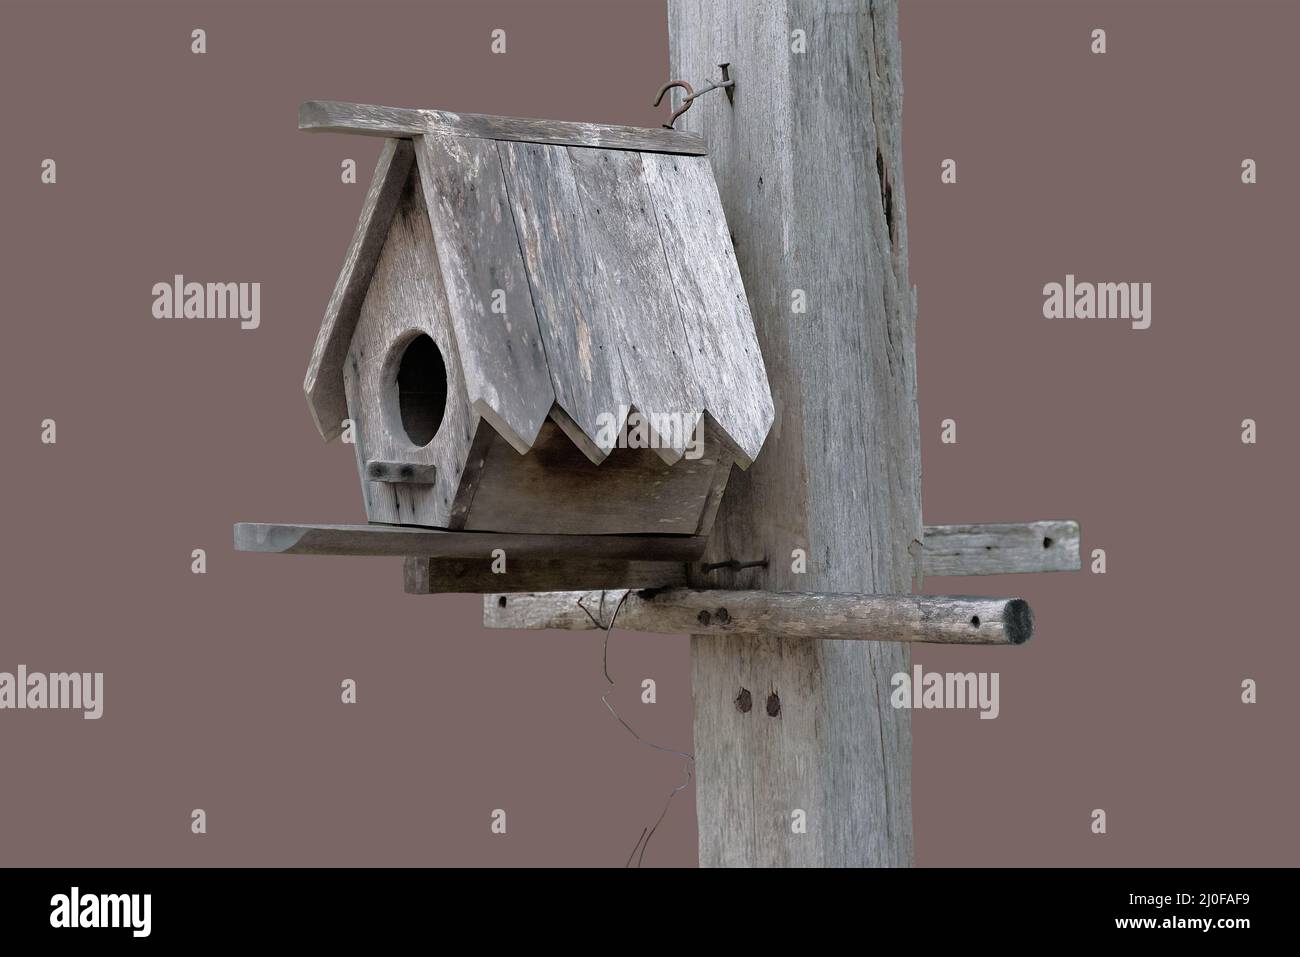 Cute little wooden birdhouse hooked onto a wooden post, on isolated brown background with clipping path. Stock Photo